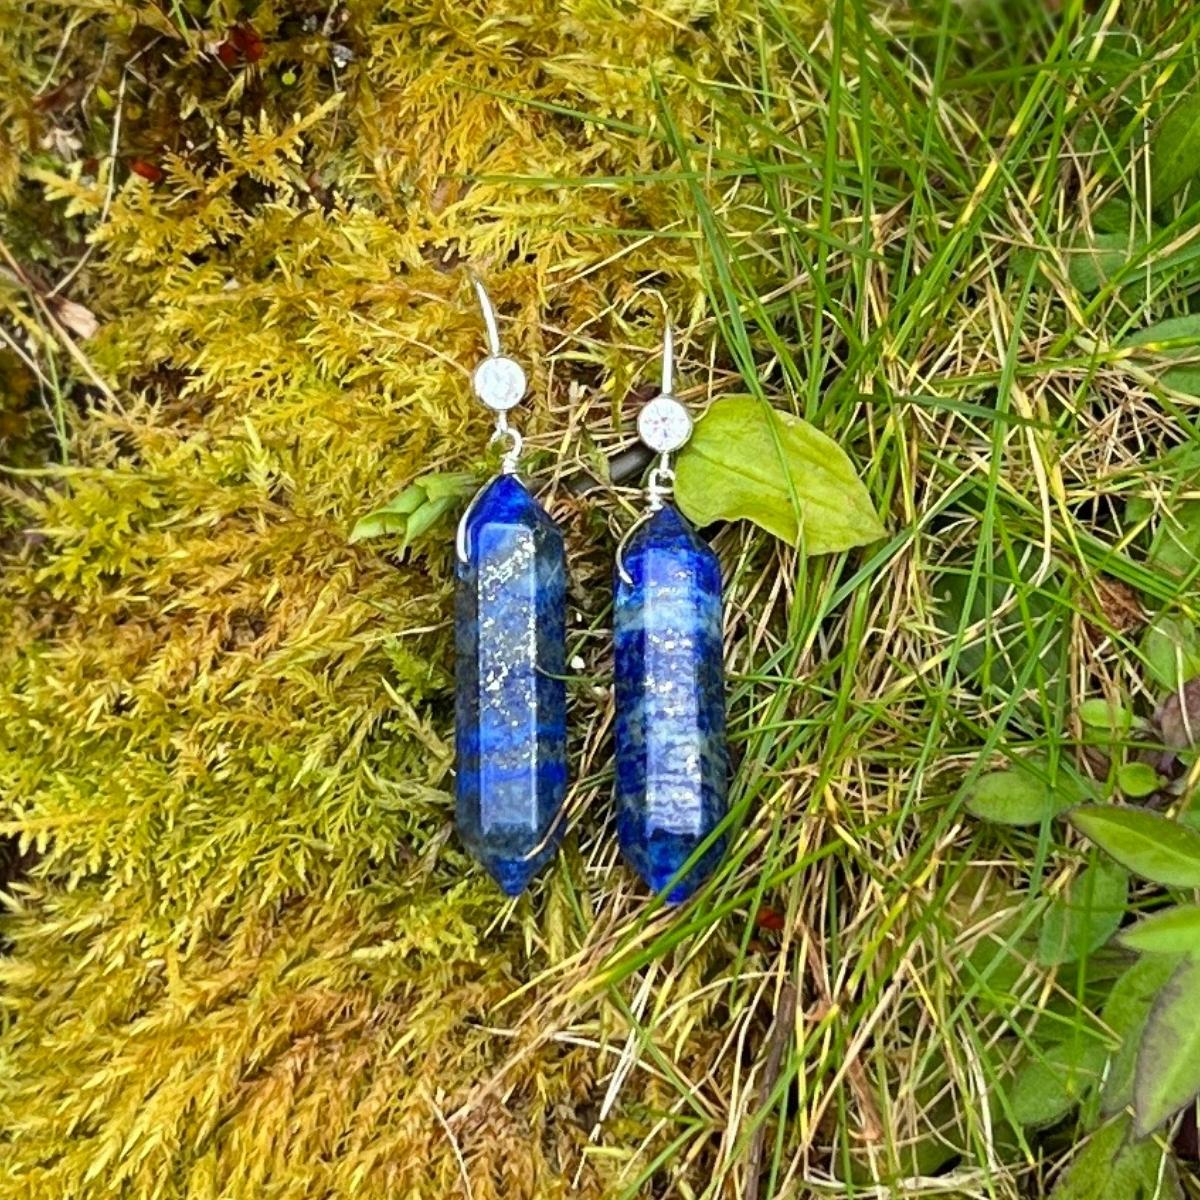 The Lapis Lazuli Meditation Earrings are a stunning pair of earrings that combine natural beauty with spiritual significance. Each earring features a double-pointed Lapis Lazuli stone, which is known for its deep blue color and unique veining. 